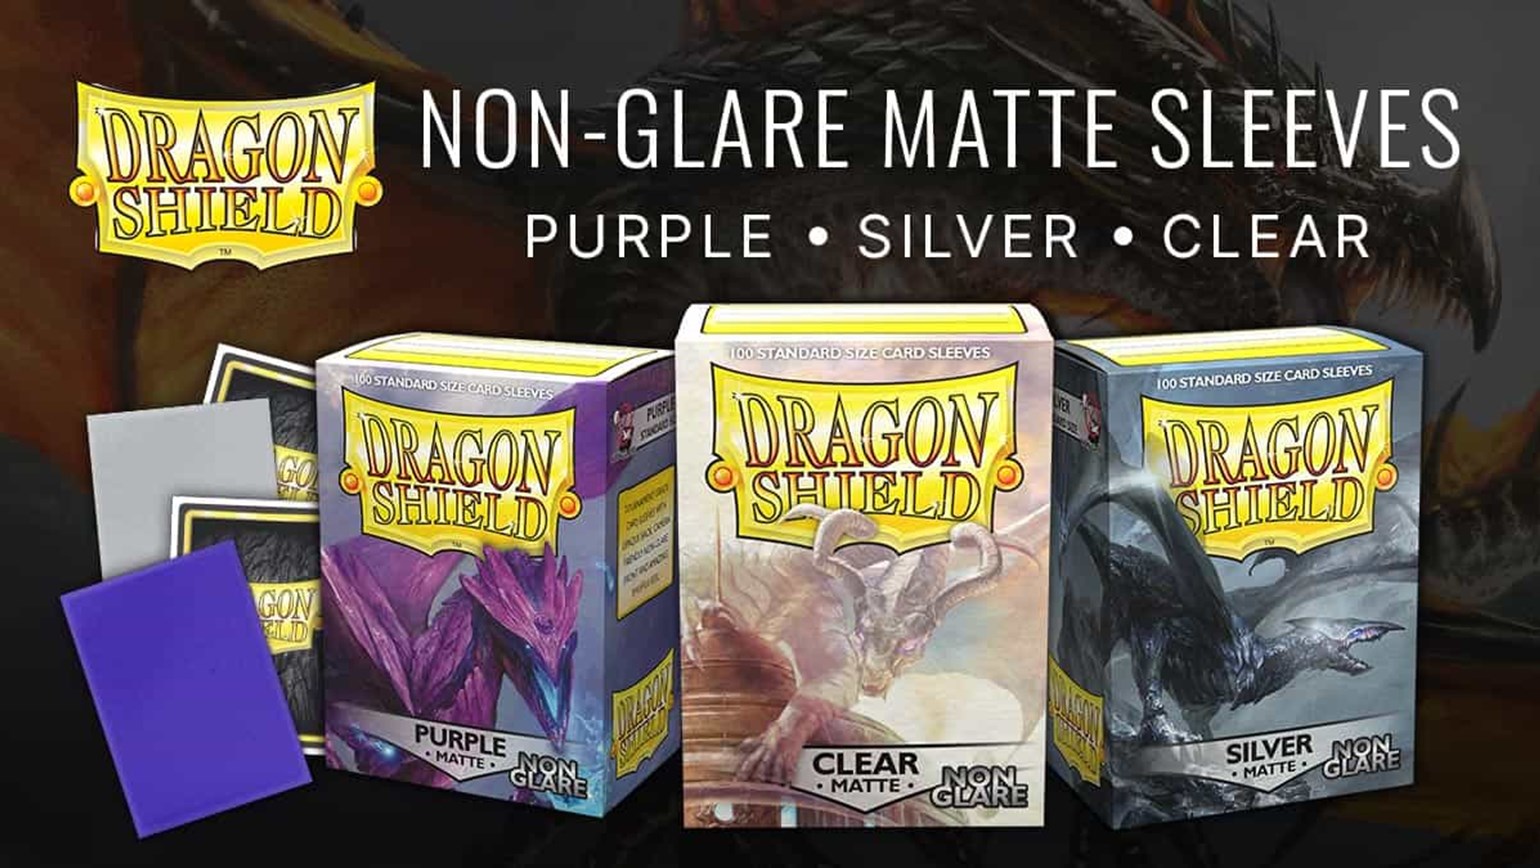 Dragon Shield Non-Glare Matte Purple, Silver and Clear Sleeves Added to TCGplayer Catalog